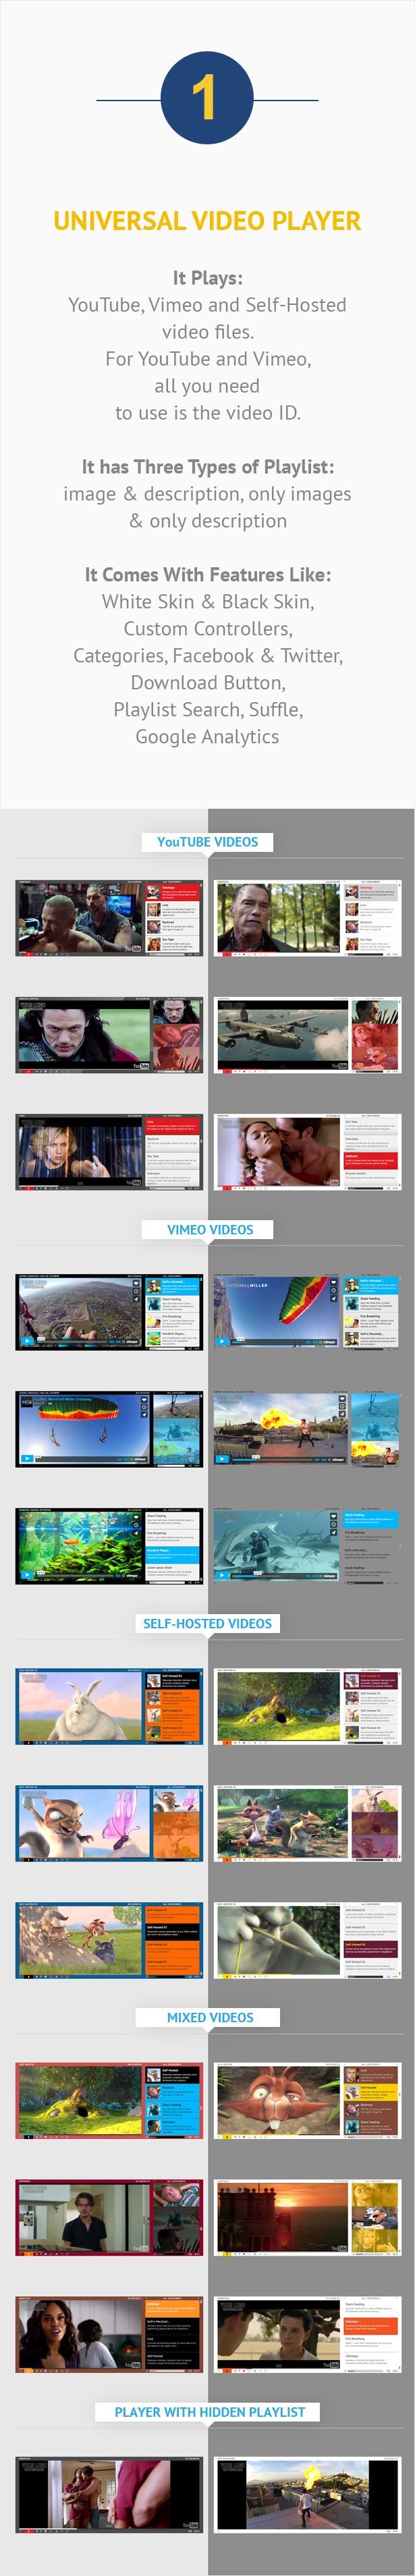 Universal Video Player VC add-on for WPBakery Page Builder (formerly Visual Composer)